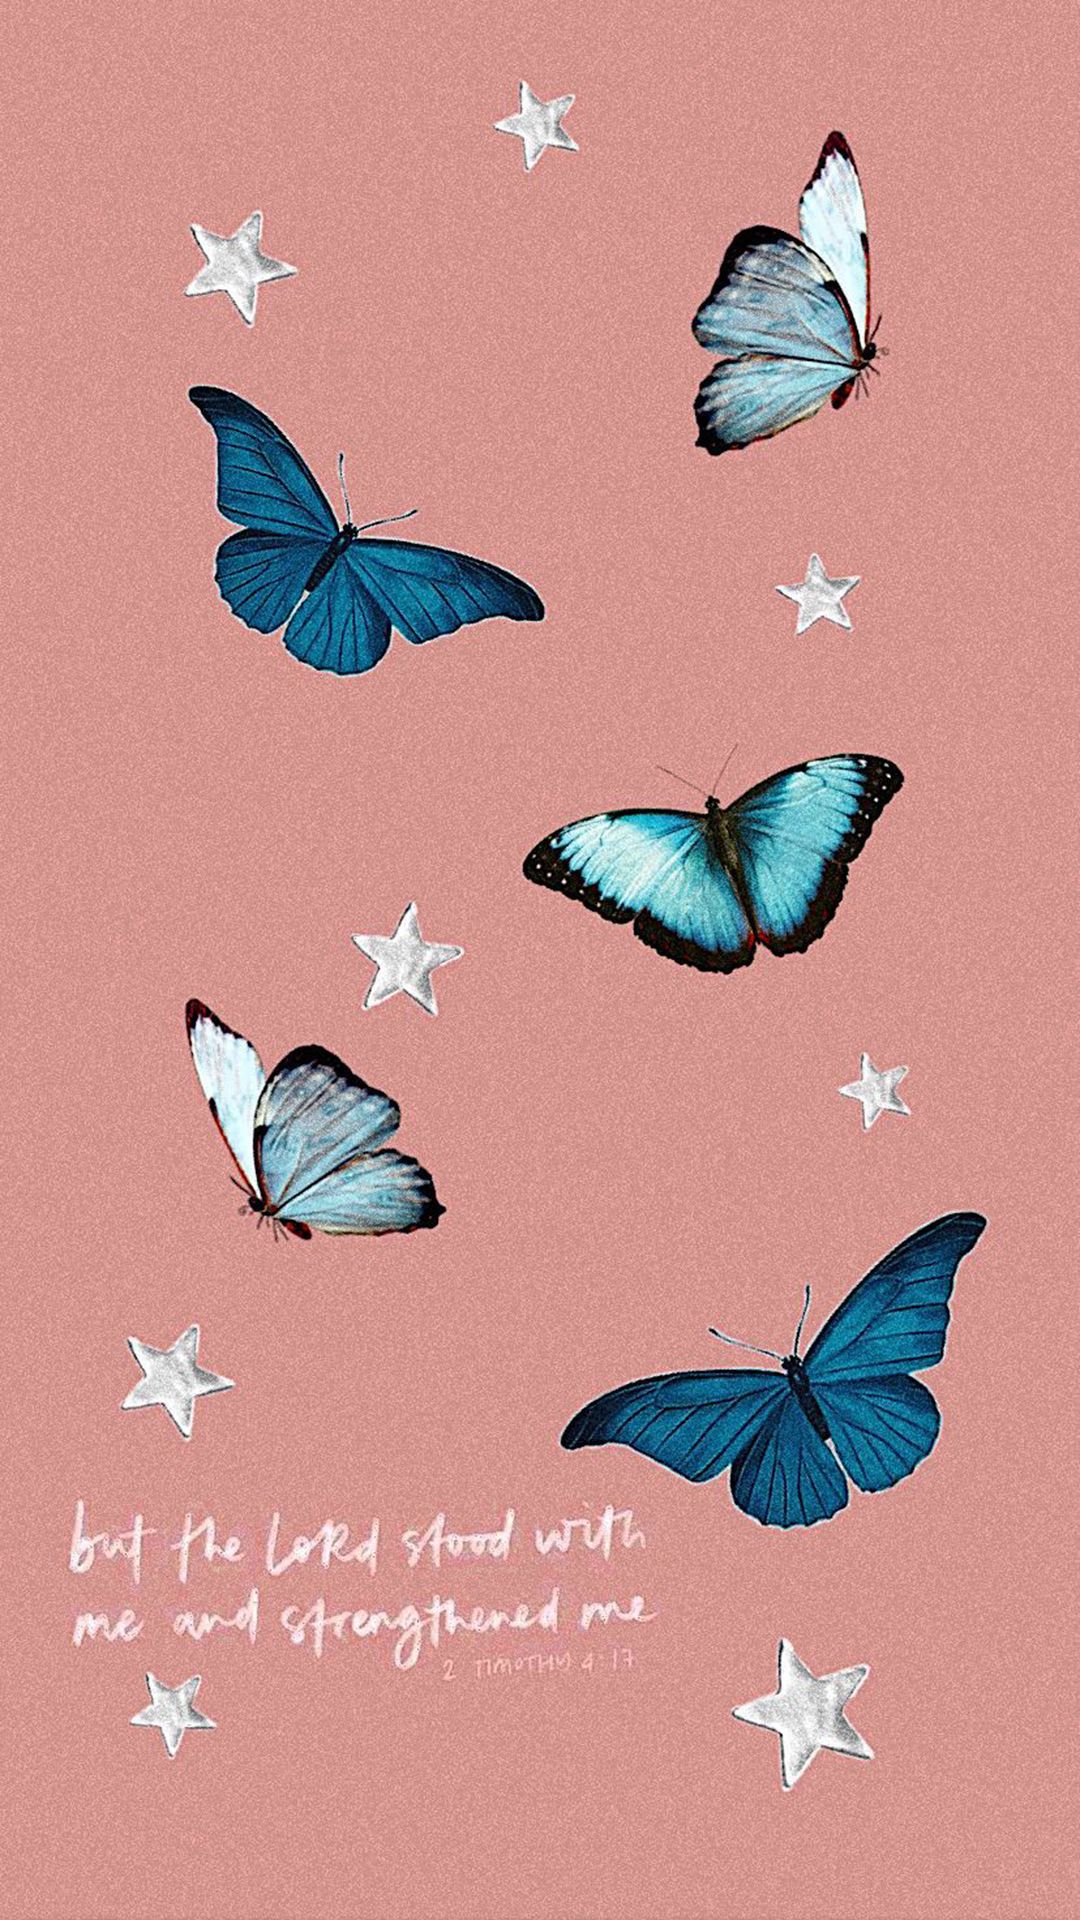 A group of butterflies with stars on them - VSCO